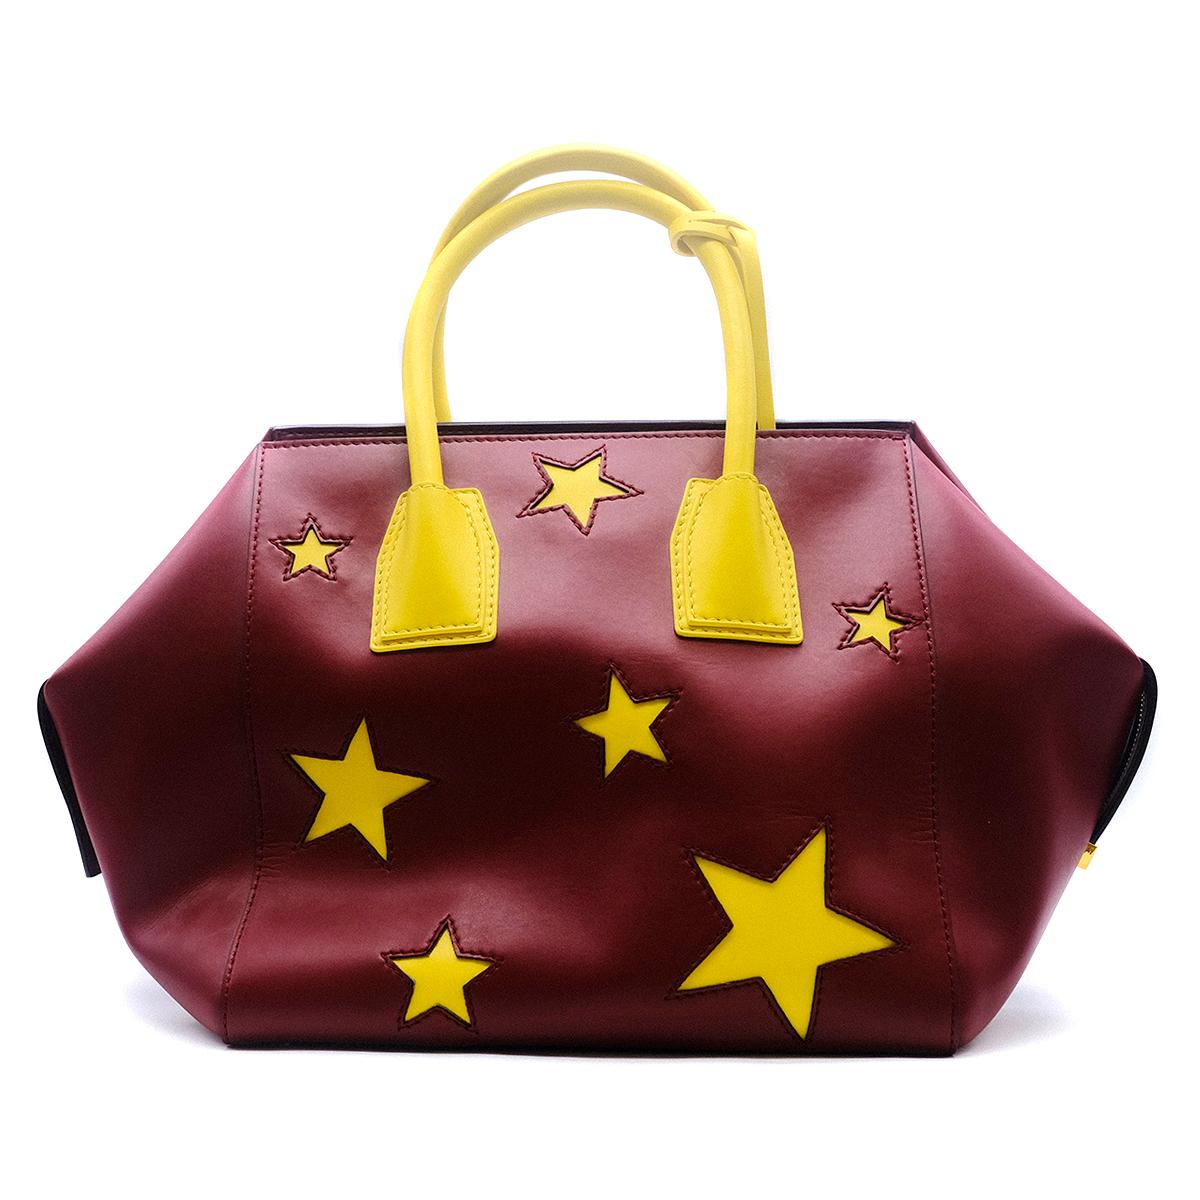 Stella McCartney Faux-Leather Stars Embossed Tote Bag

- Red & yellow tote bag 
- Contrasting star cutouts 
- Rolled yellow tote handles
- Gold-tone hardware zip fastening
- Bag charm with a gold plated Stella McCartney logo
- Interior pocket
- This